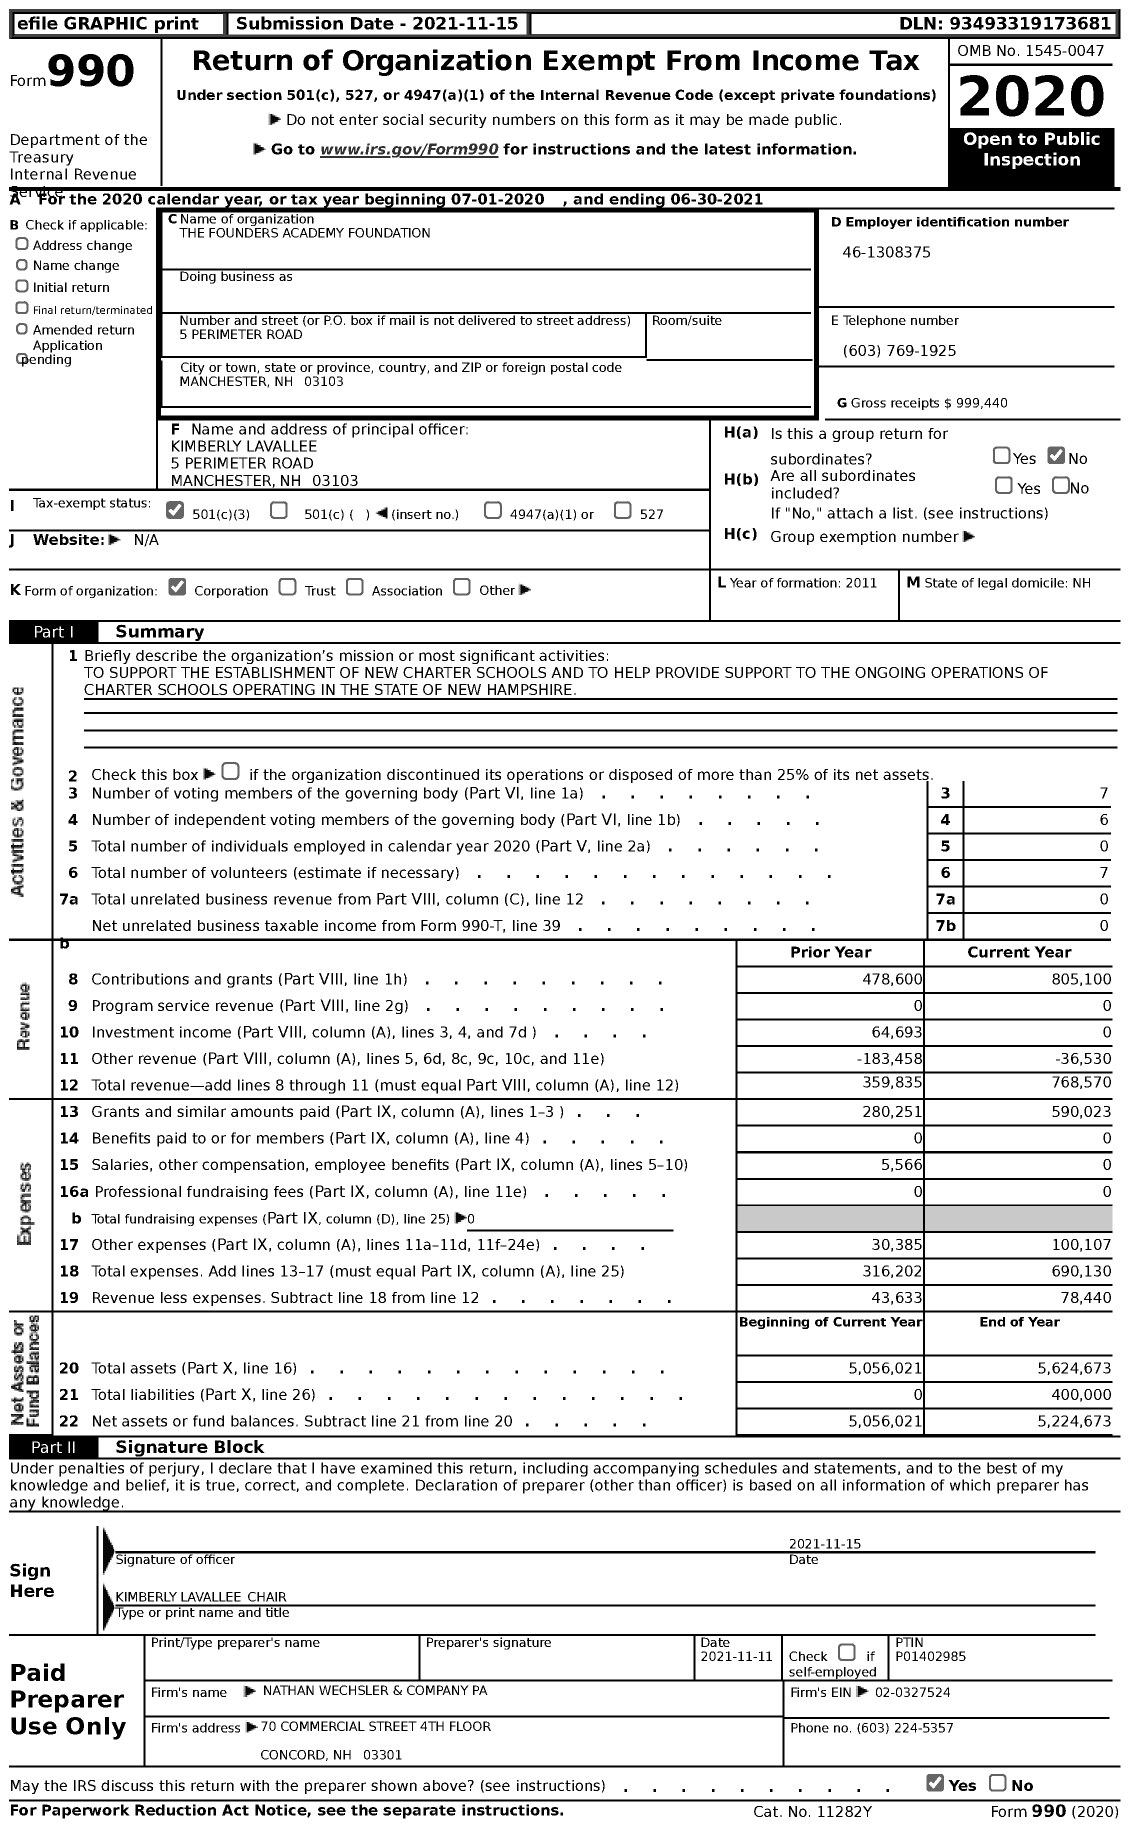 Image of first page of 2020 Form 990 for The Founders Academy Foundation